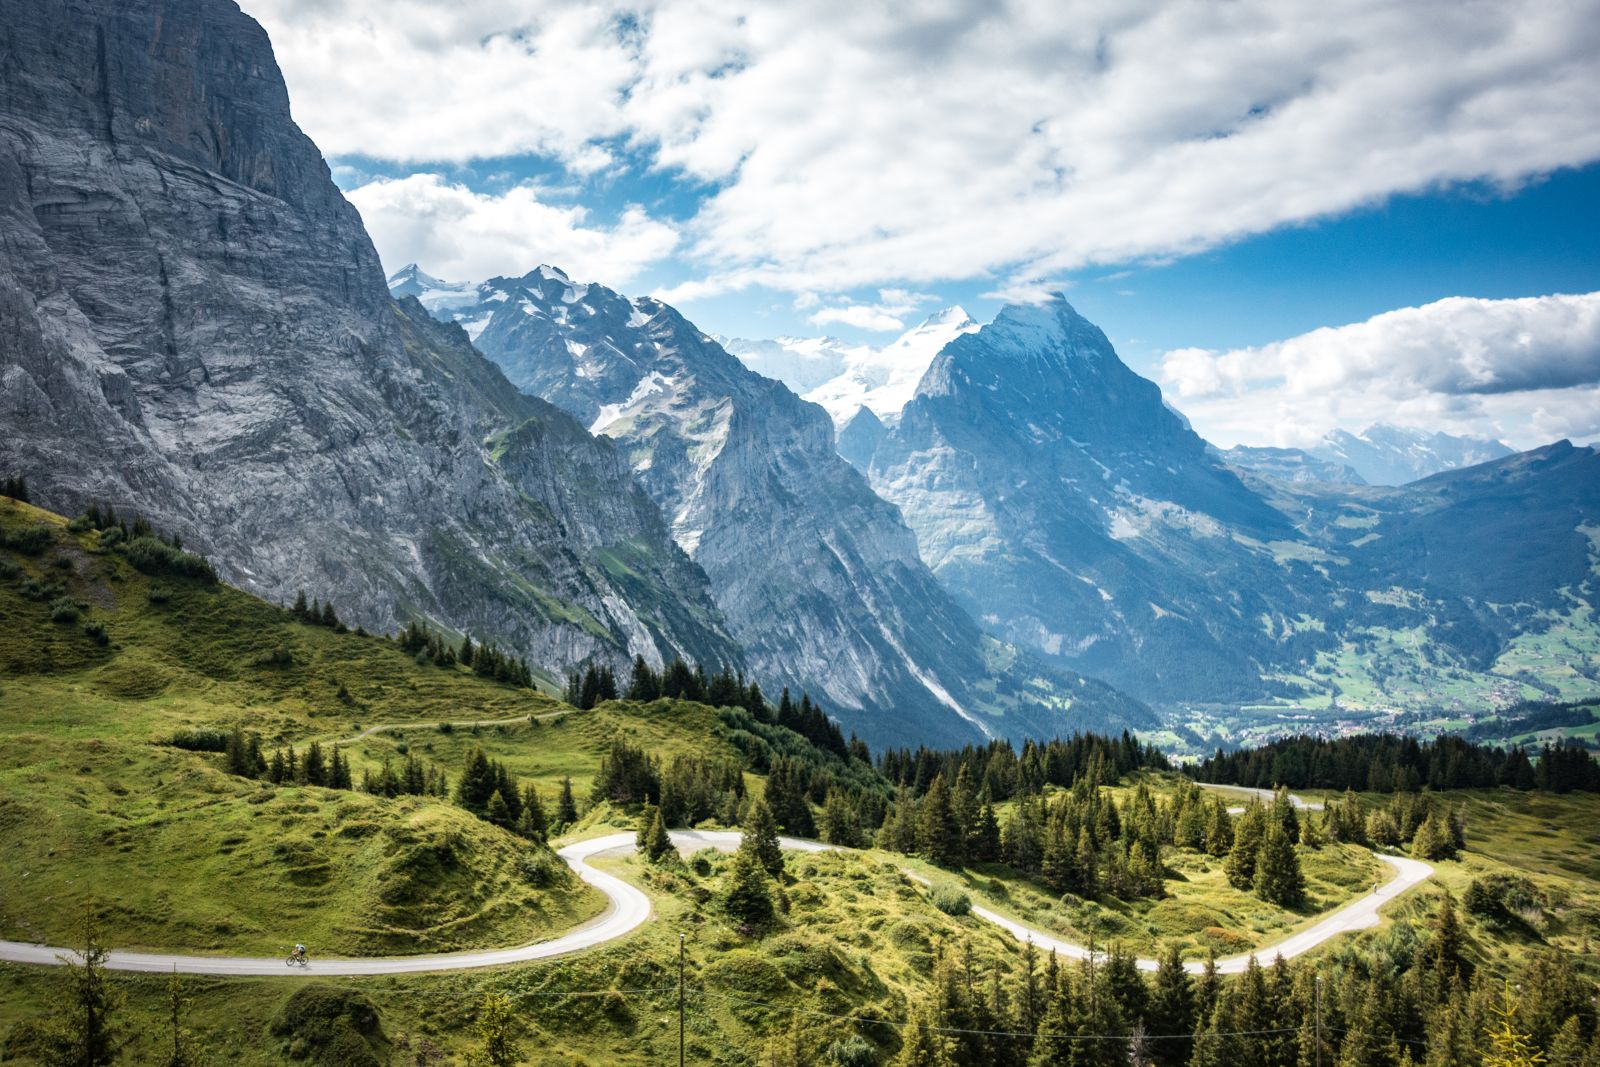 Cycling stories from the dramatically high mountains of Switzerland